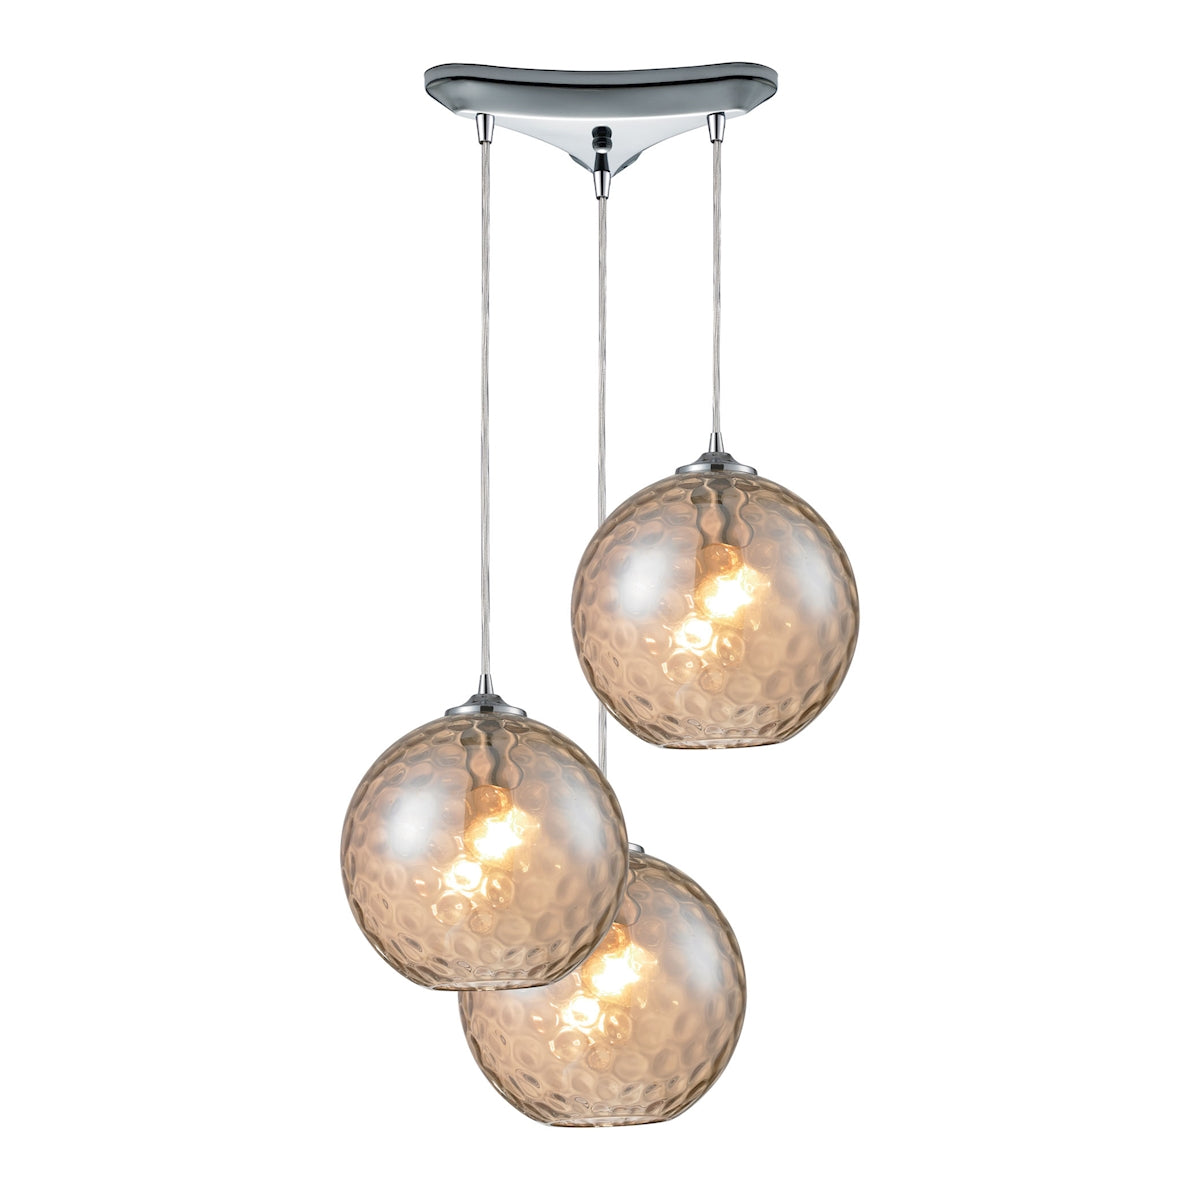 ELK Lighting 31380/3CMP Watersphere 3-Light Triangular Pendant Fixture in Chrome with Hammered Amber Glass